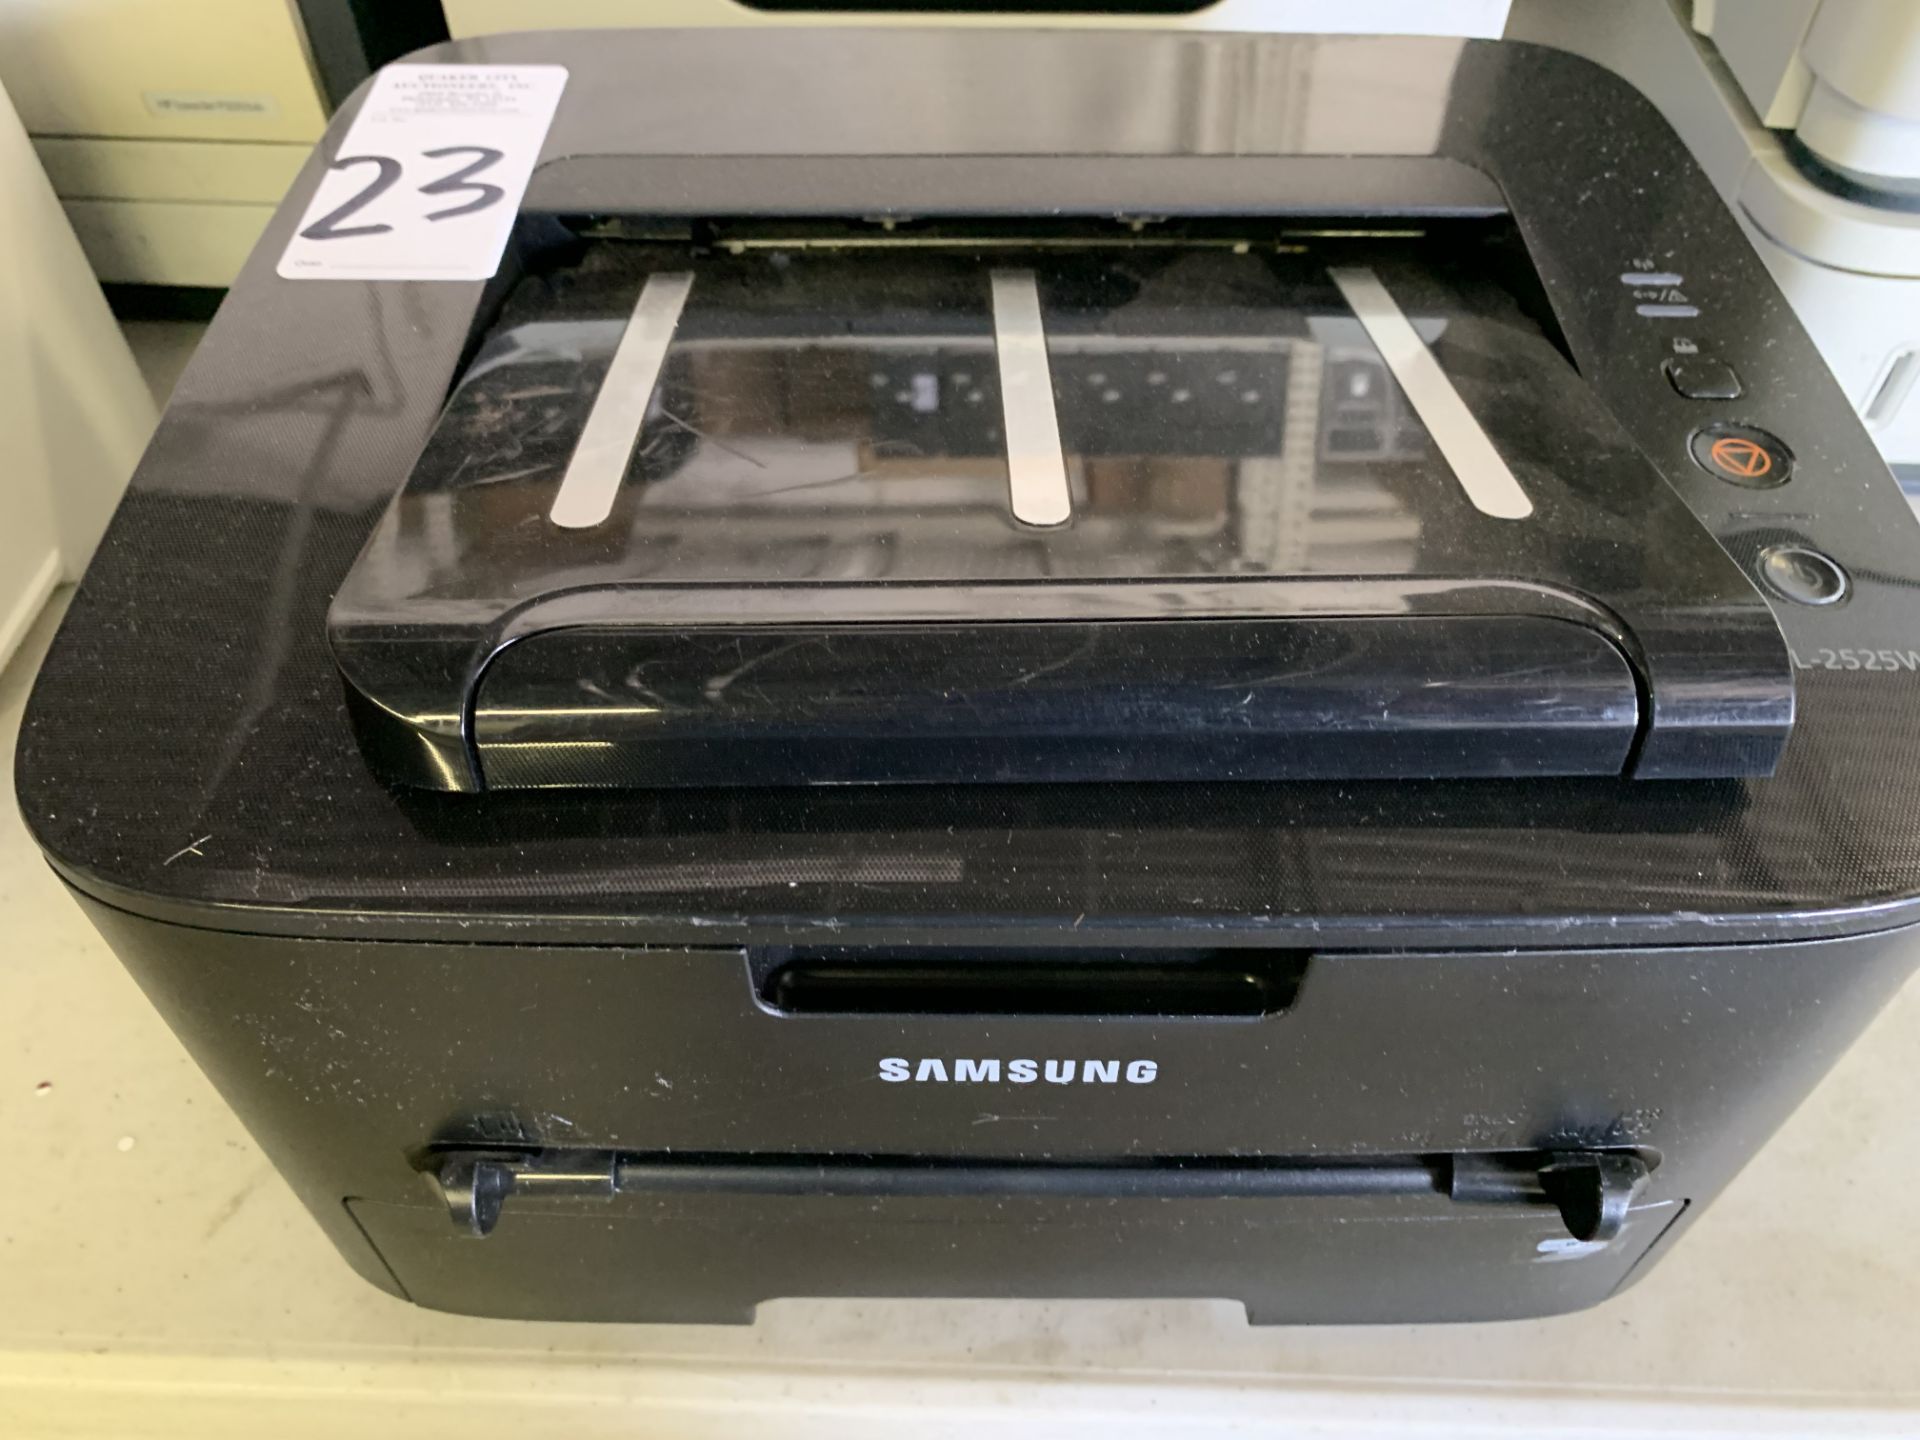 BROTHER HL-5370DW AND SAMSUNG ML-2525W PRINTERS